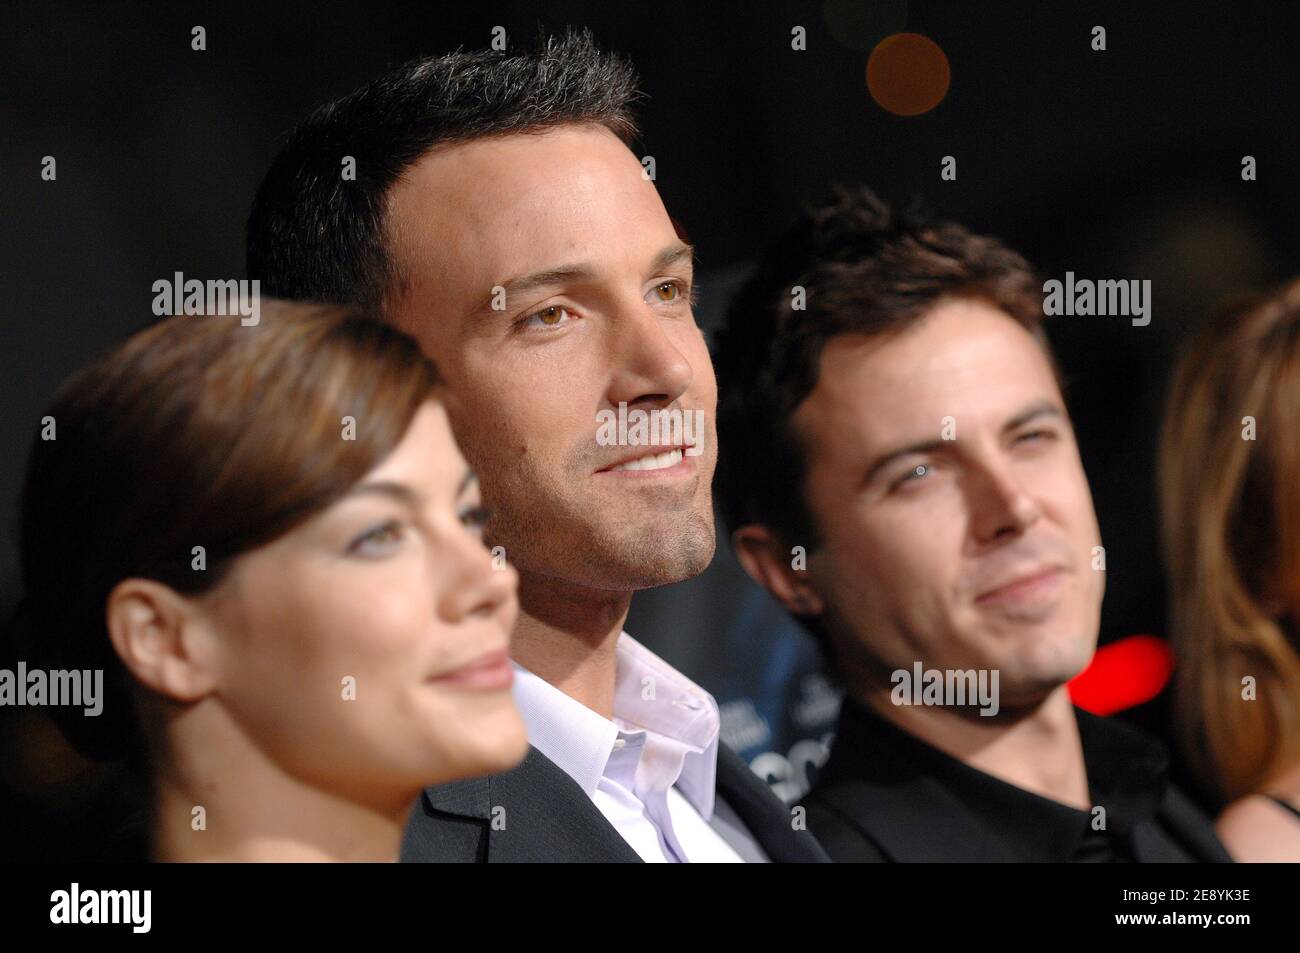 'Michelle Monaghan, Ben Affleck and Casey Affleck attend the premiere of ''Gone Baby Gone'' held at the Mann Bruin Theater in Westwood. Los Angeles, CA, USA, October 8, 2007. Photo by Lionel Hahn/ABACAPRESS.COM' Stock Photo